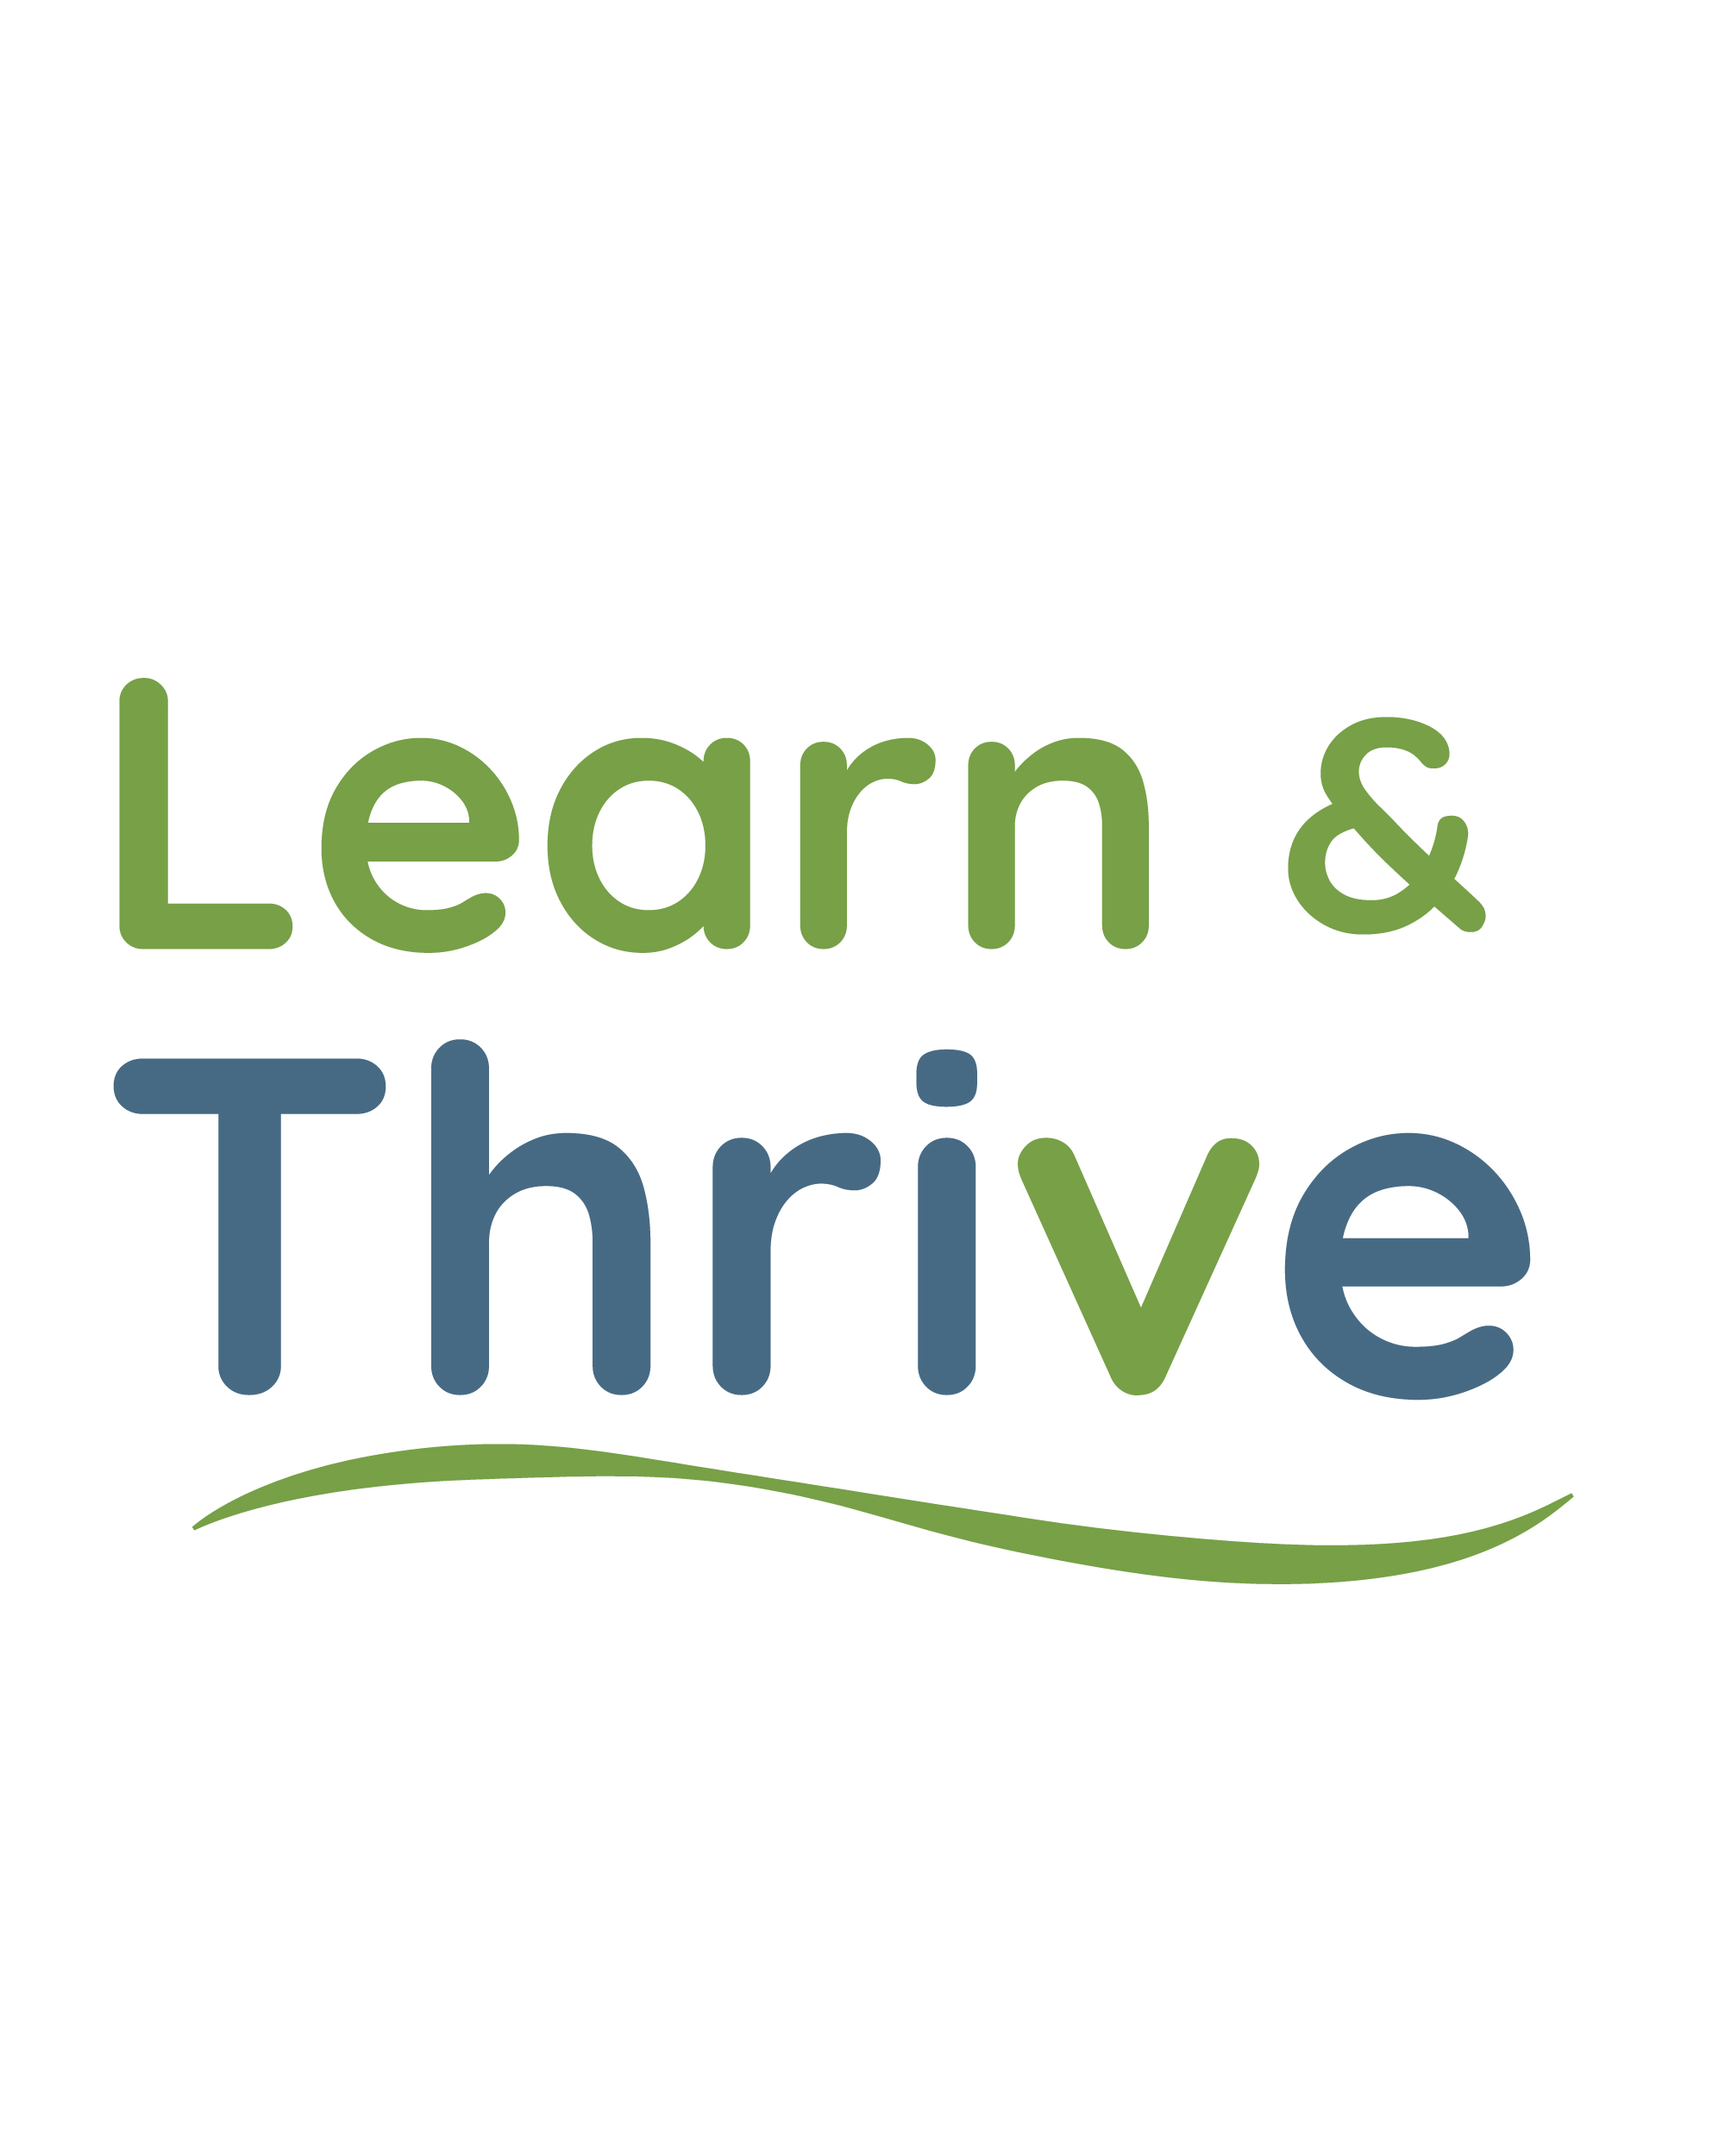 Learn and Thrive